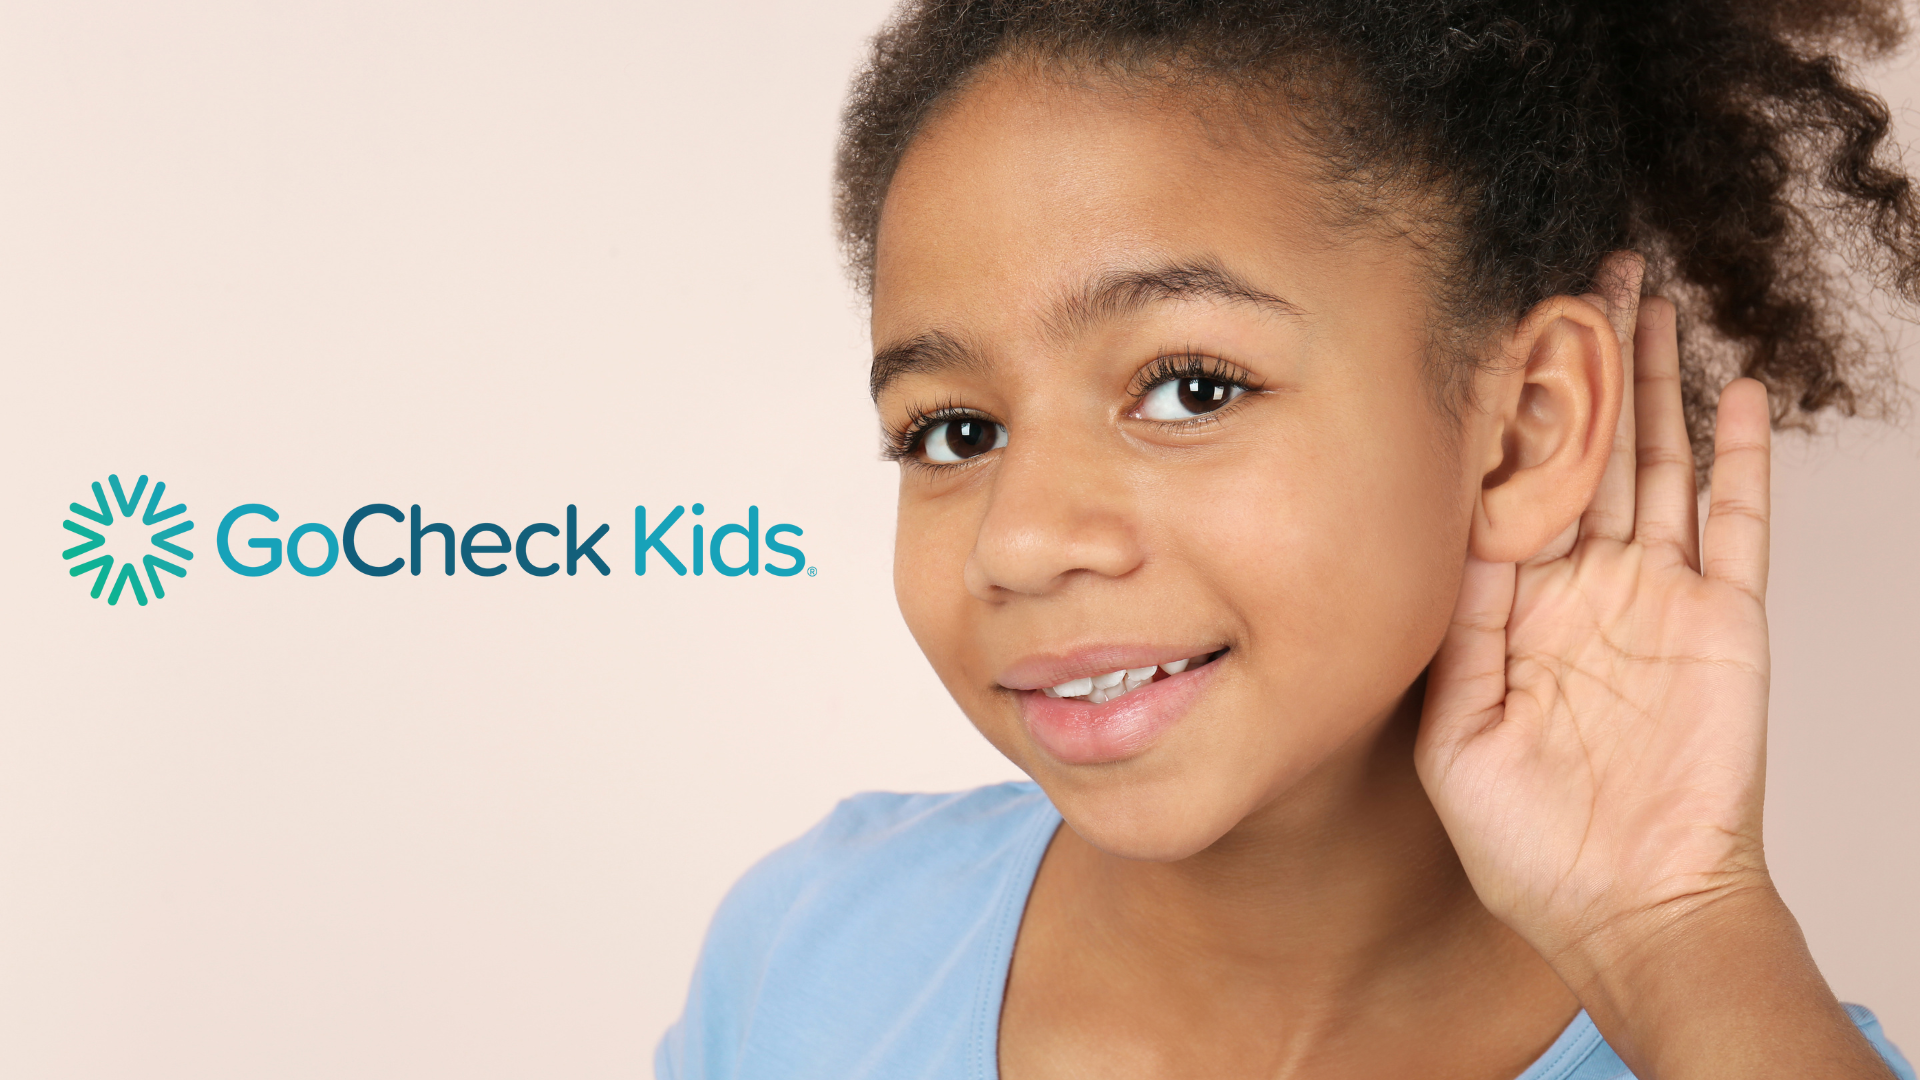 GoCheck Kids Announces Partnership with hearX - featured image